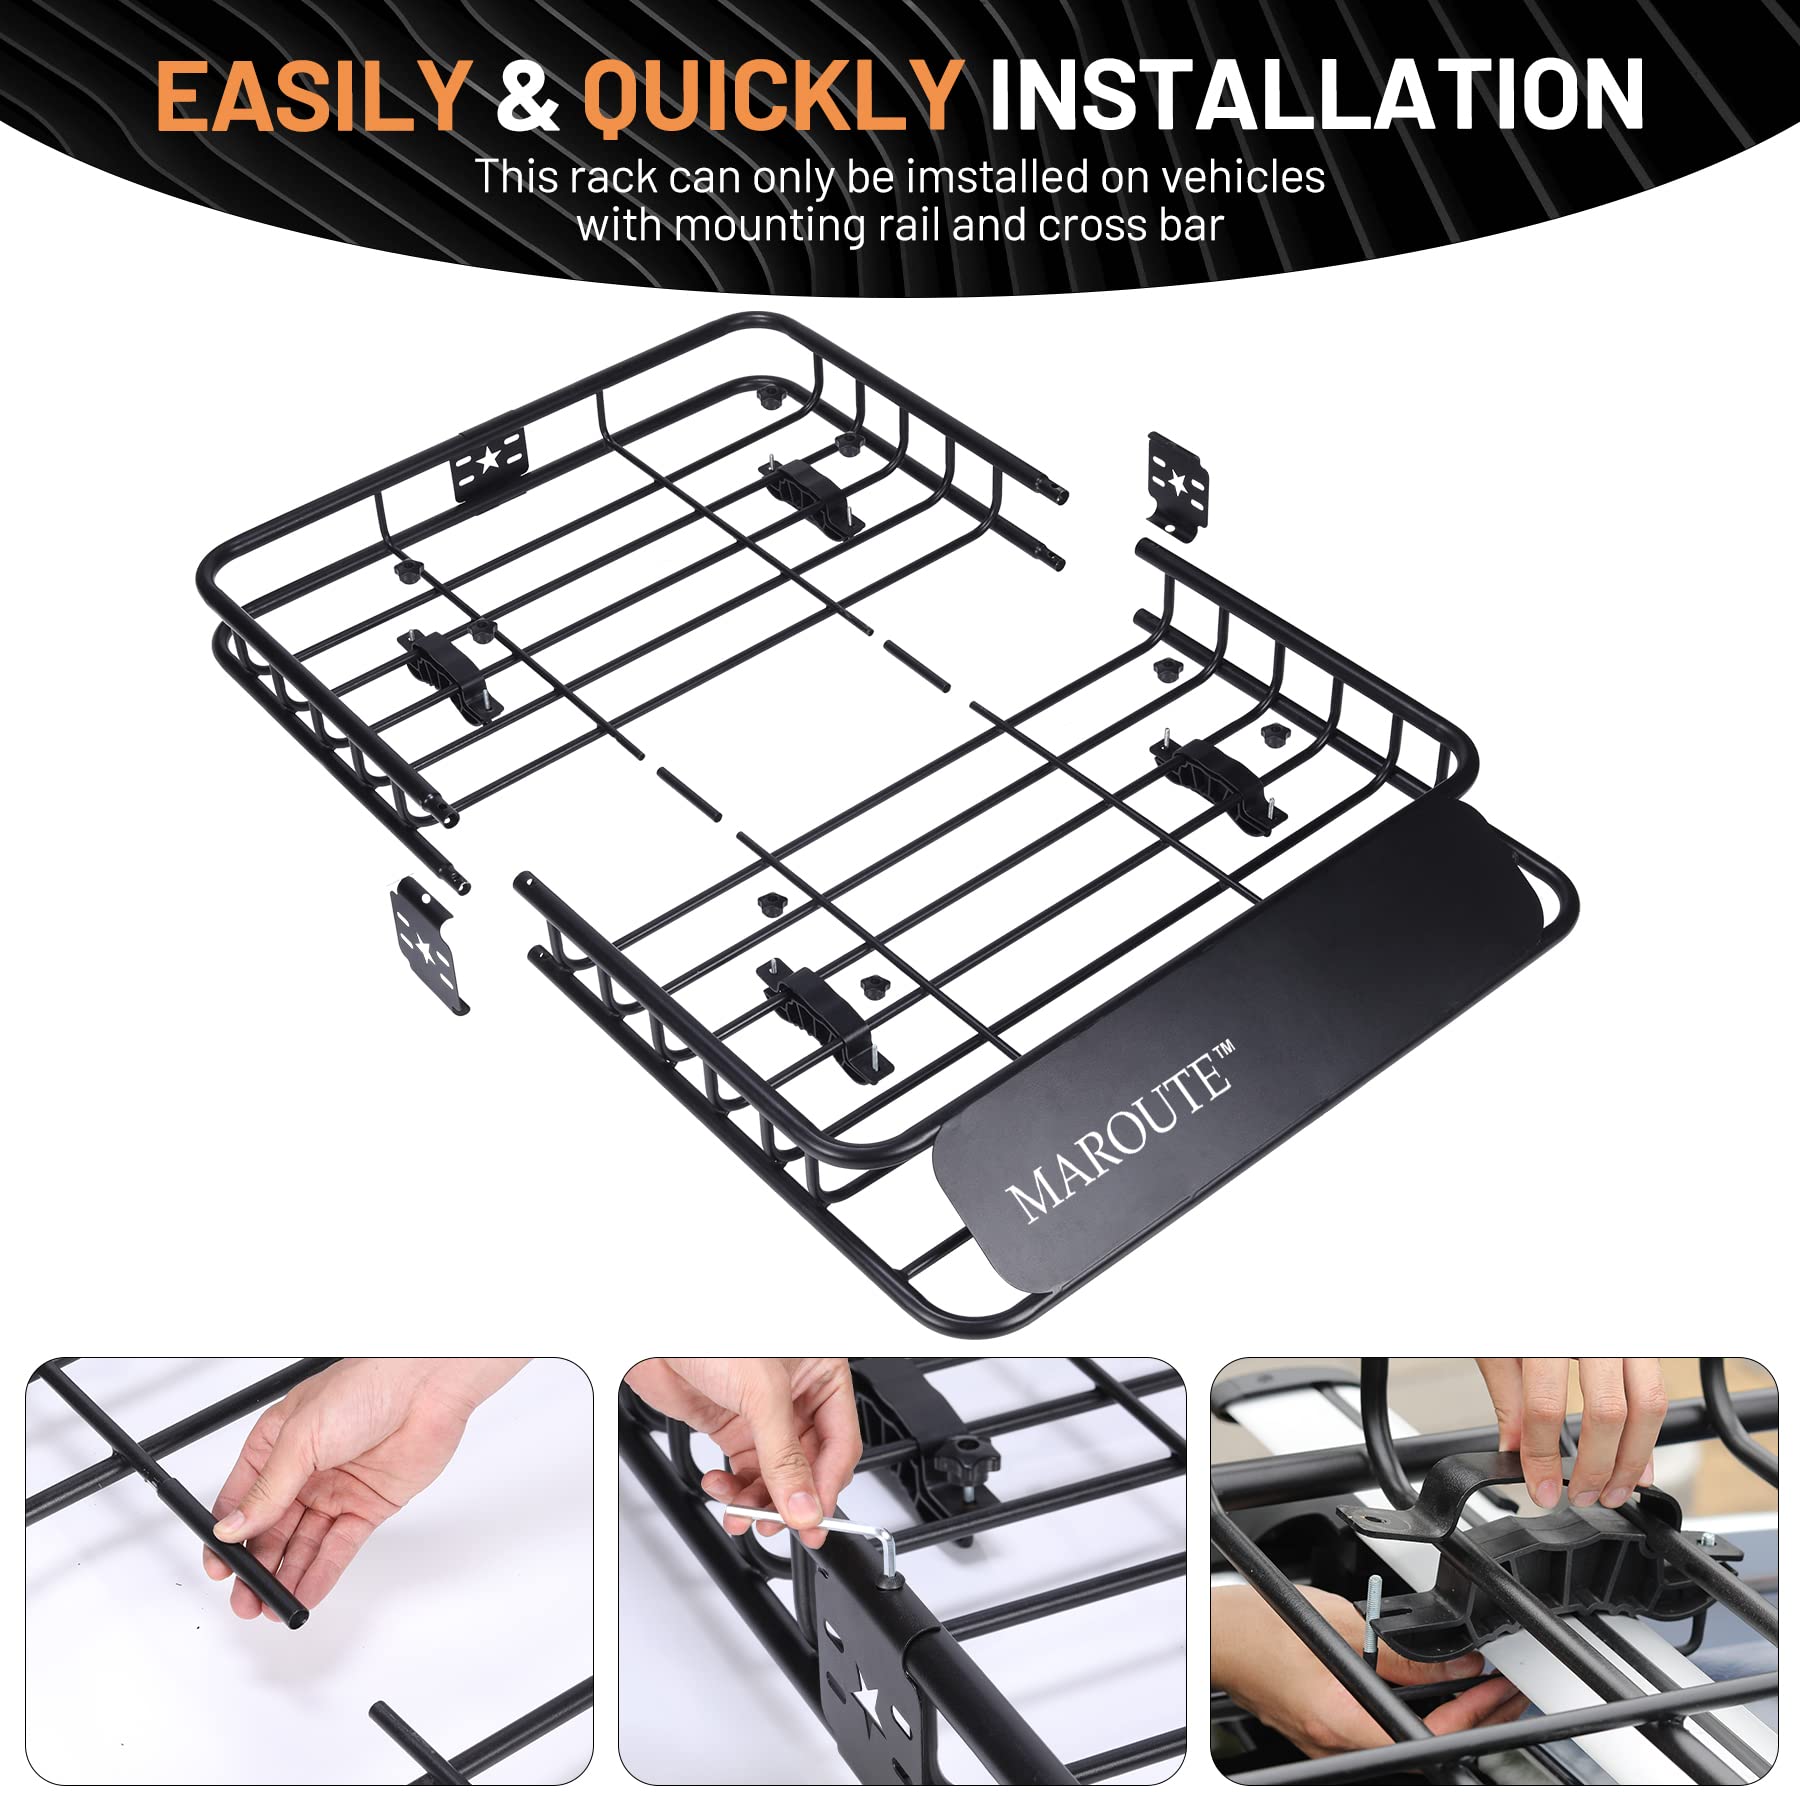 Roof Rack Carrier Basket Universal 51" X 36" X 5" Rooftop Cargo Carrier Basket Car Luggage Holder Universal for SUV Cars- 200 lb. Capacity (ROOF Basket)